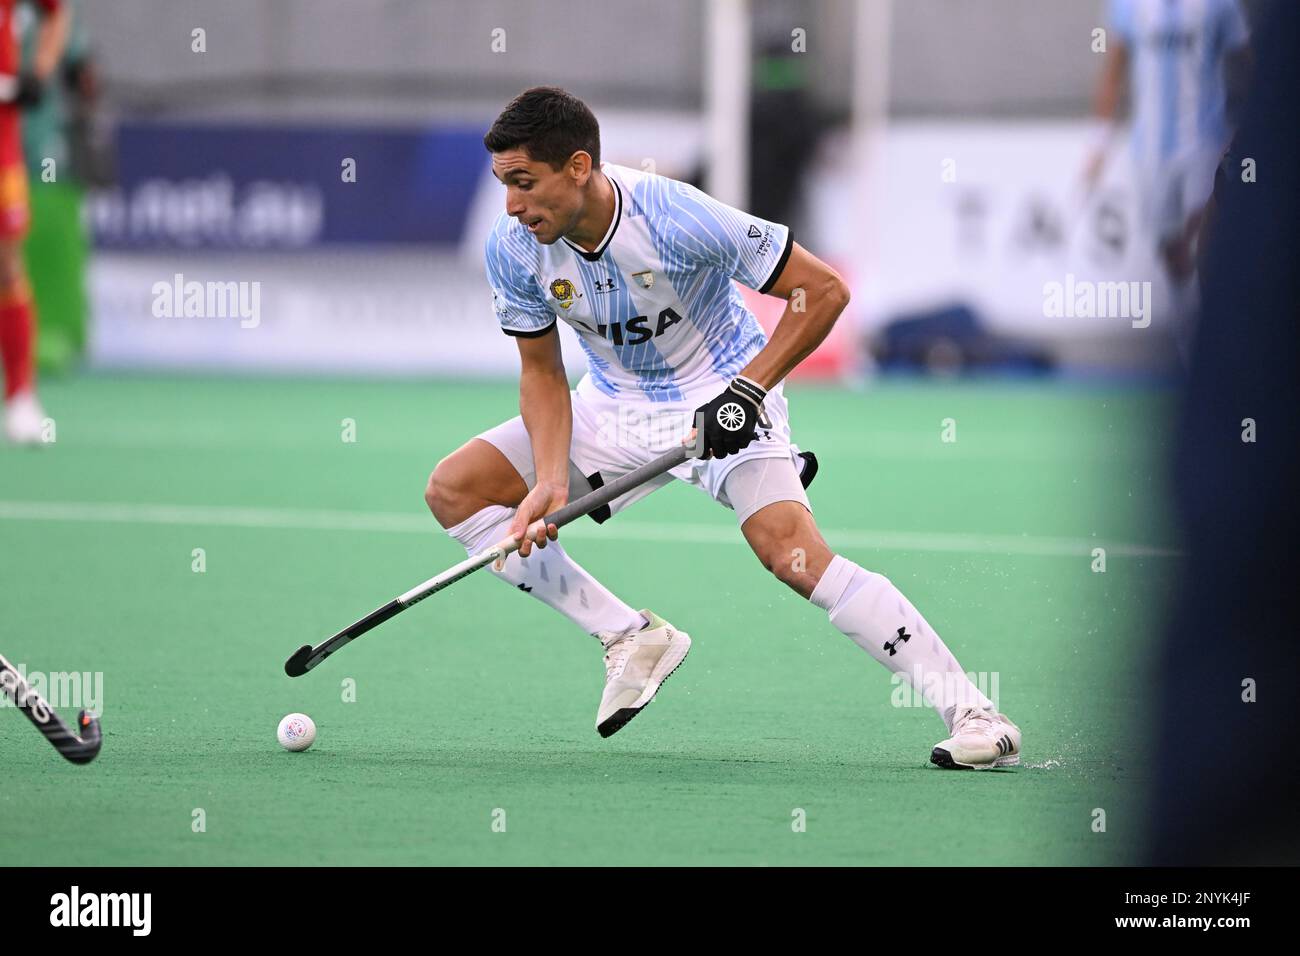 Hobart, Australia. 02nd Mar, 2023. Federico Fernandez of Argentina Men's National field hockey team in action during the 2022/23 International Hockey Federation (FIH) Men's Pro-League match between Argentina and Spain held at the Tasmanian Hockey Centre in Hobart. Final score Spain 4:3 Argentina. (Photo by Luis Veniegra/SOPA Images/Sipa USA) Credit: Sipa USA/Alamy Live News Stock Photo